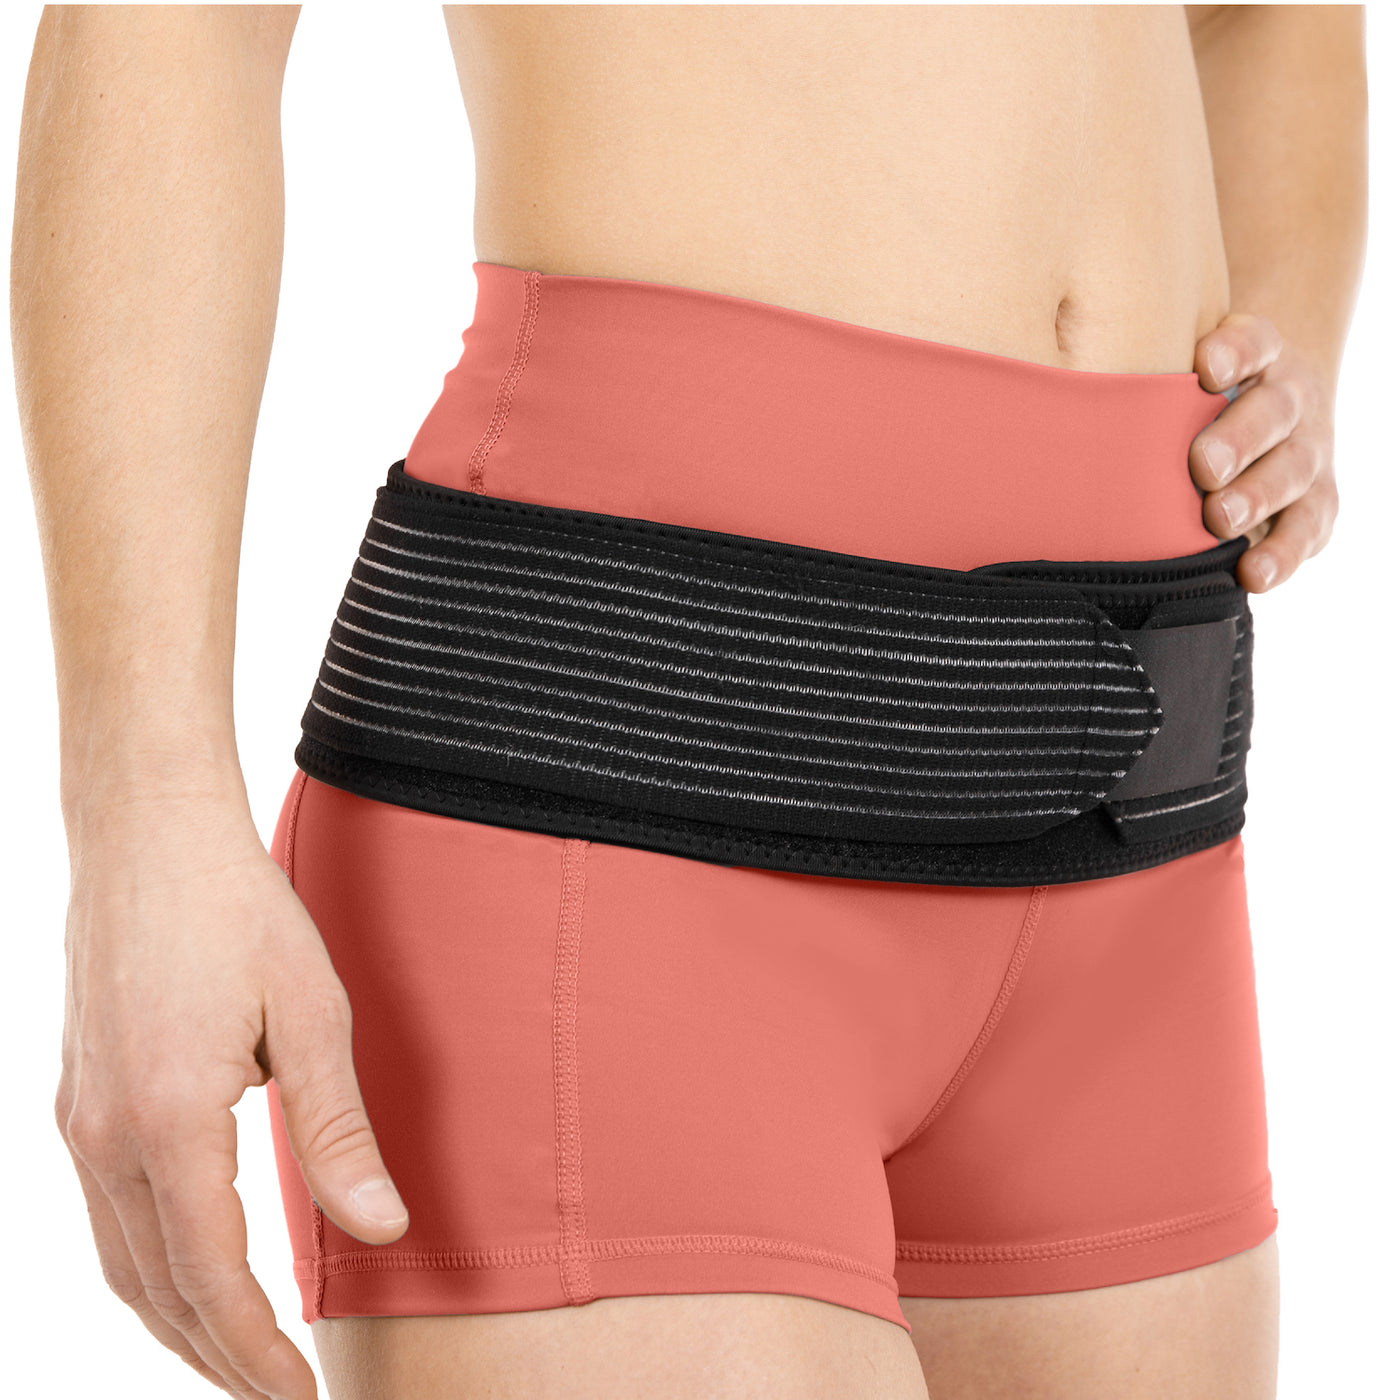 Wear the anterior pelvic tilt brace day or night to help fix and correct lower crossed syndrome